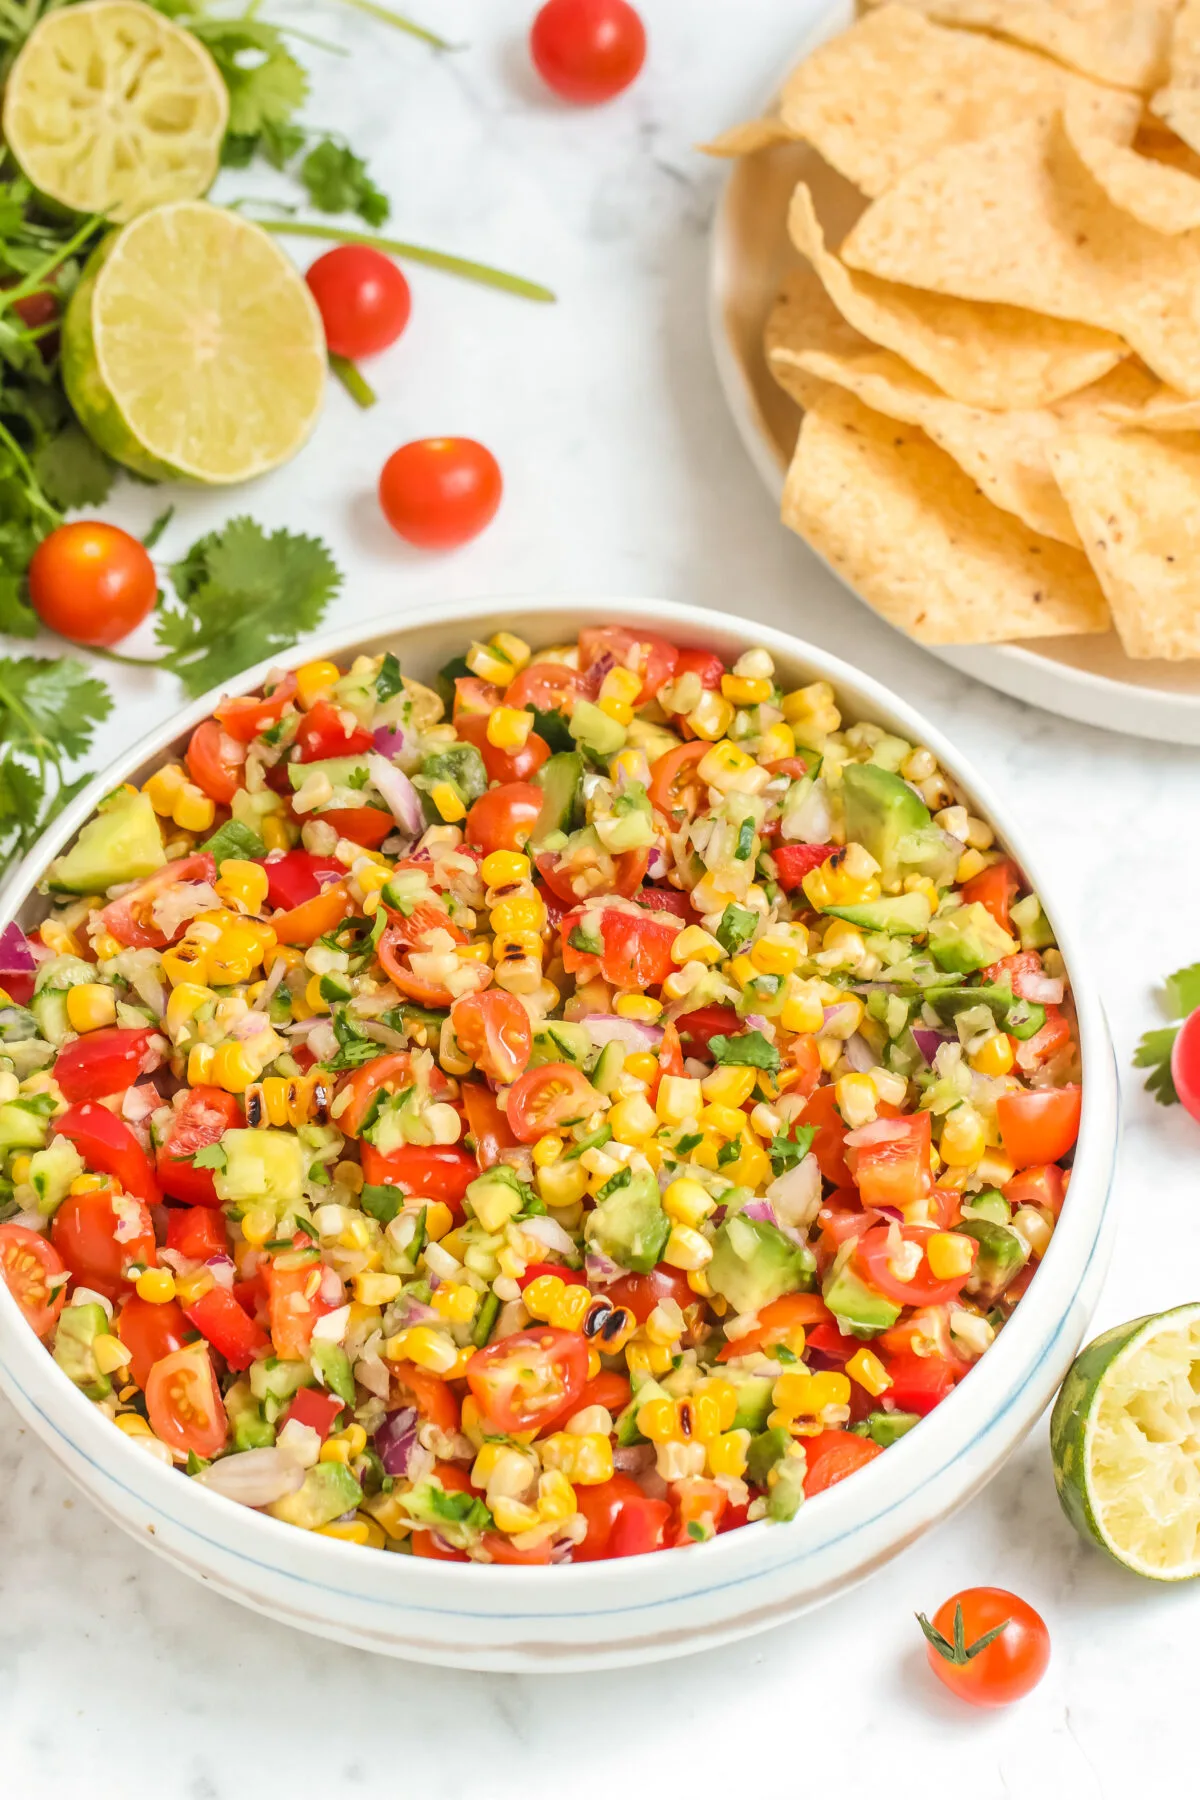 Looking for a new and delicious salad recipe? Look no further than this grilled corn salad! It's perfect for summer BBQs or potlucks.